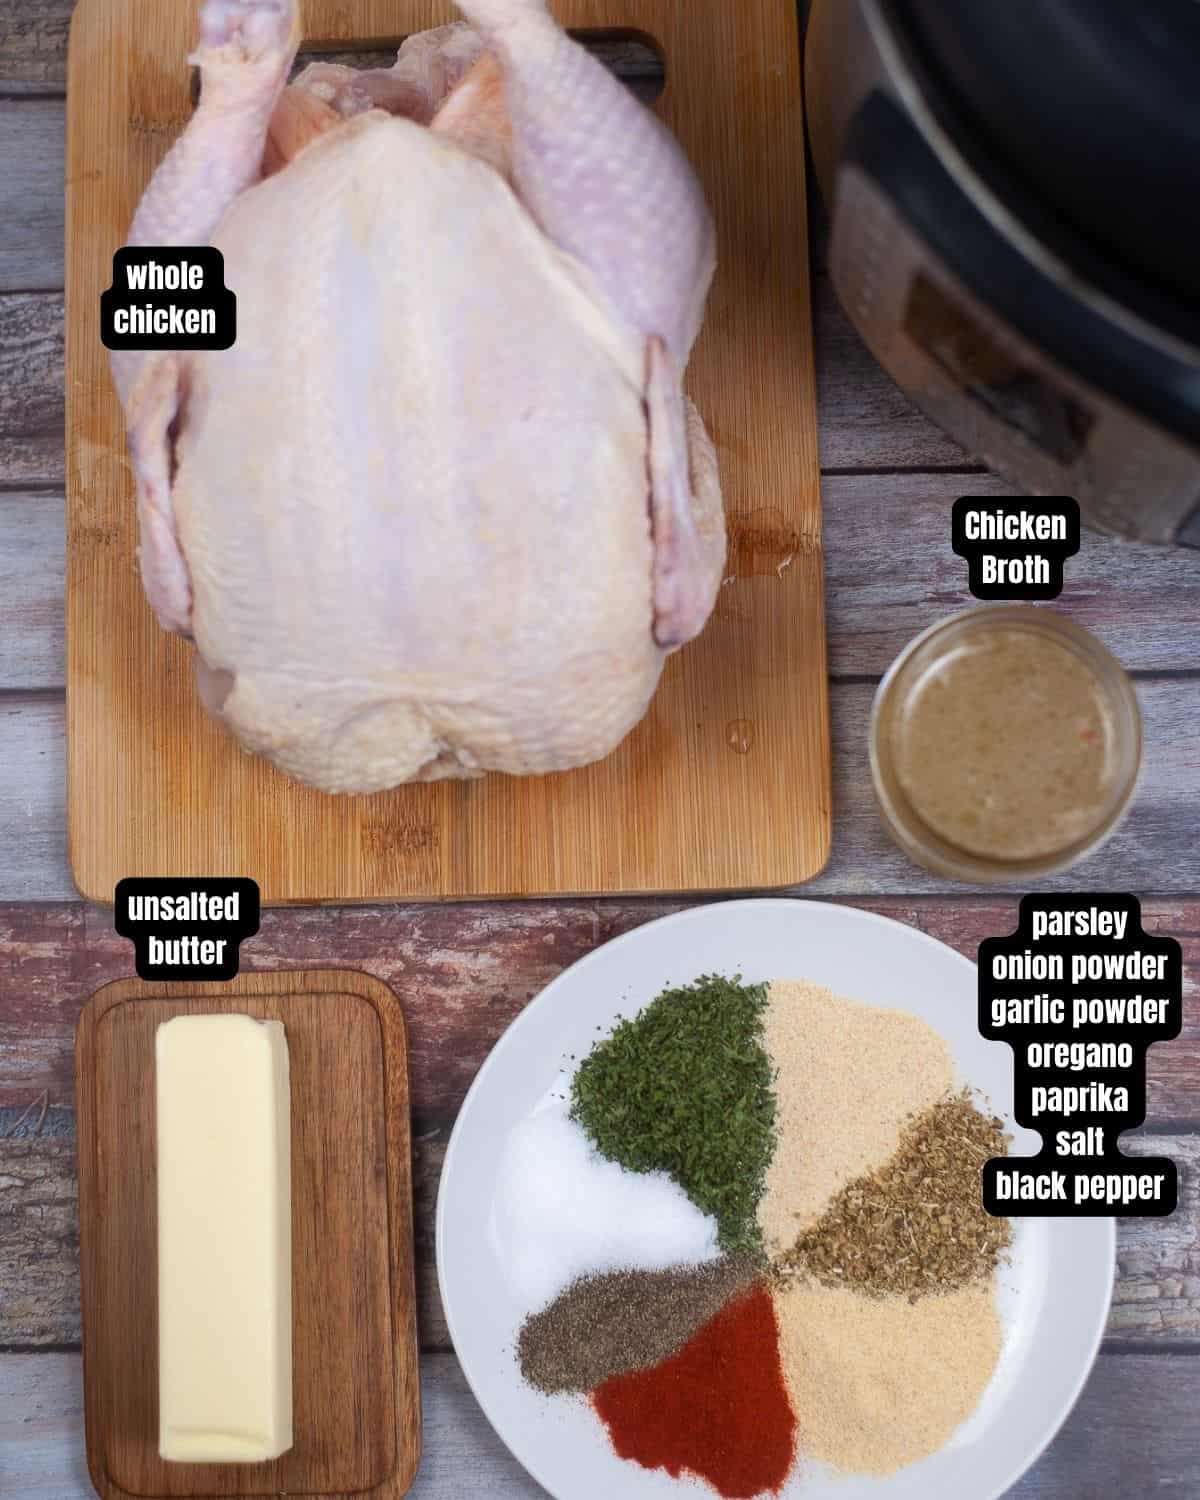 Ingredients with text overlay of what is needed to make instant pot whole roasted chicken.